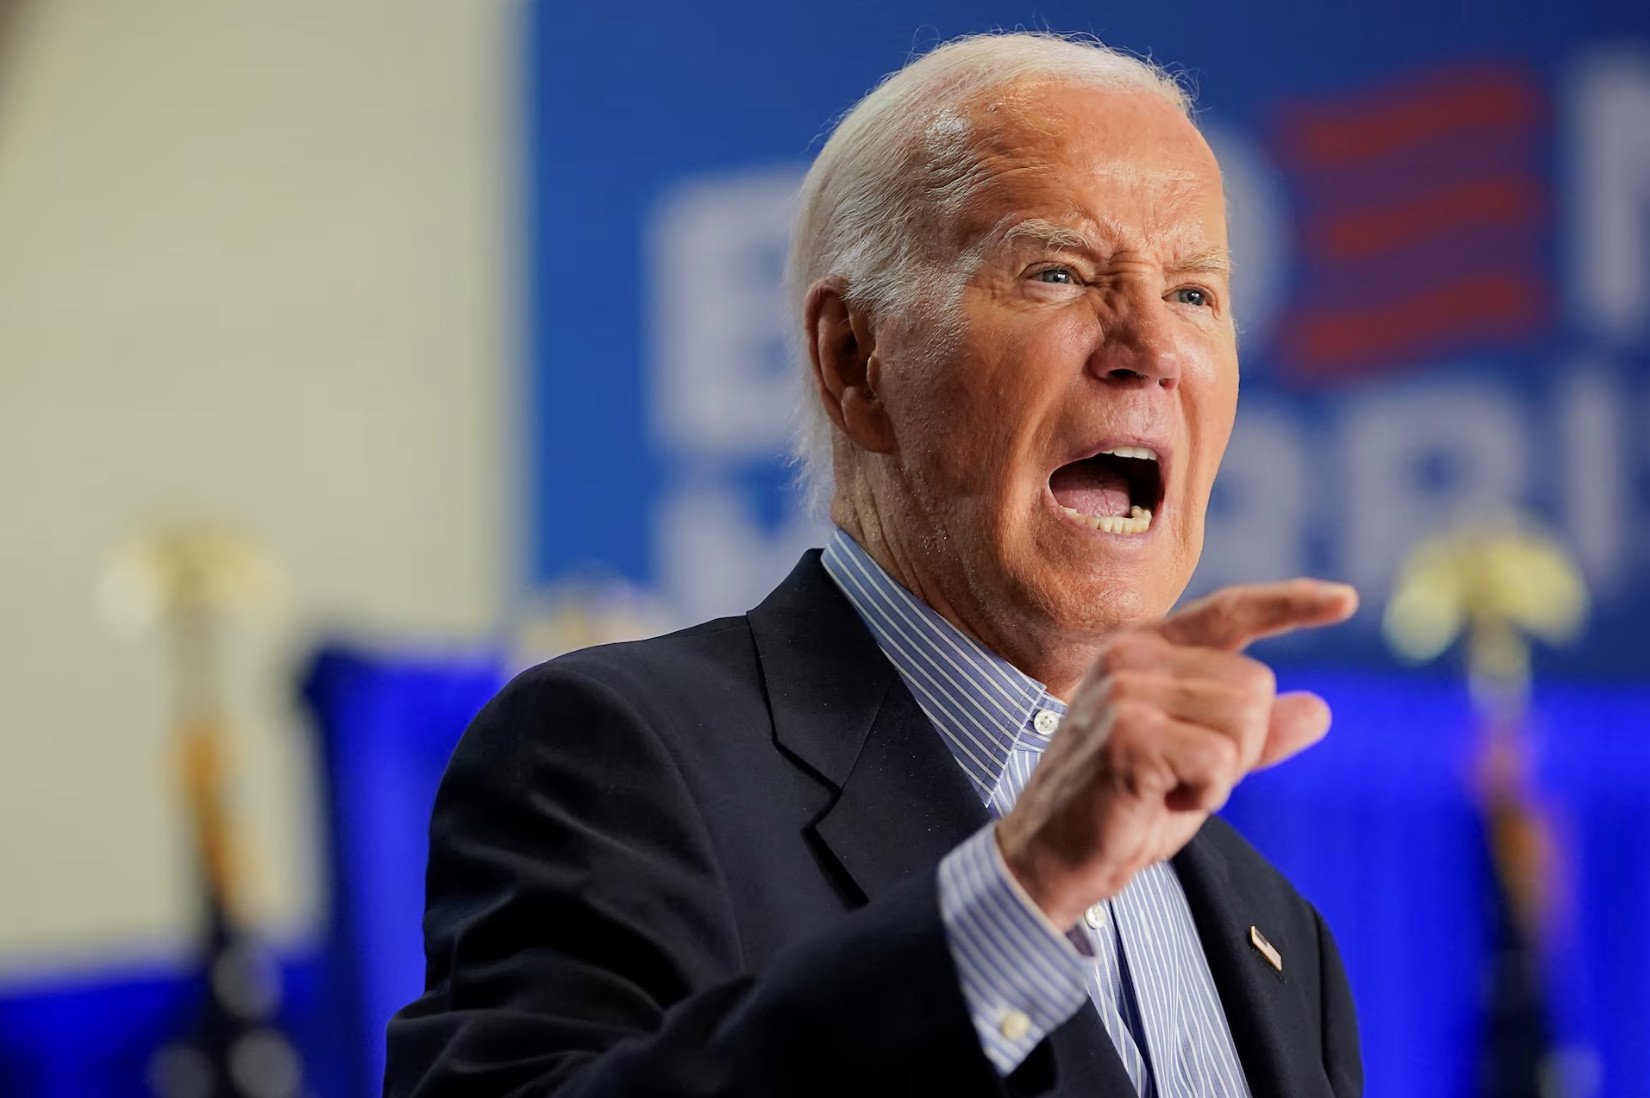 u s president joe biden speaks during a campaign event at sherman middle school in madison wisconsin photo reuters